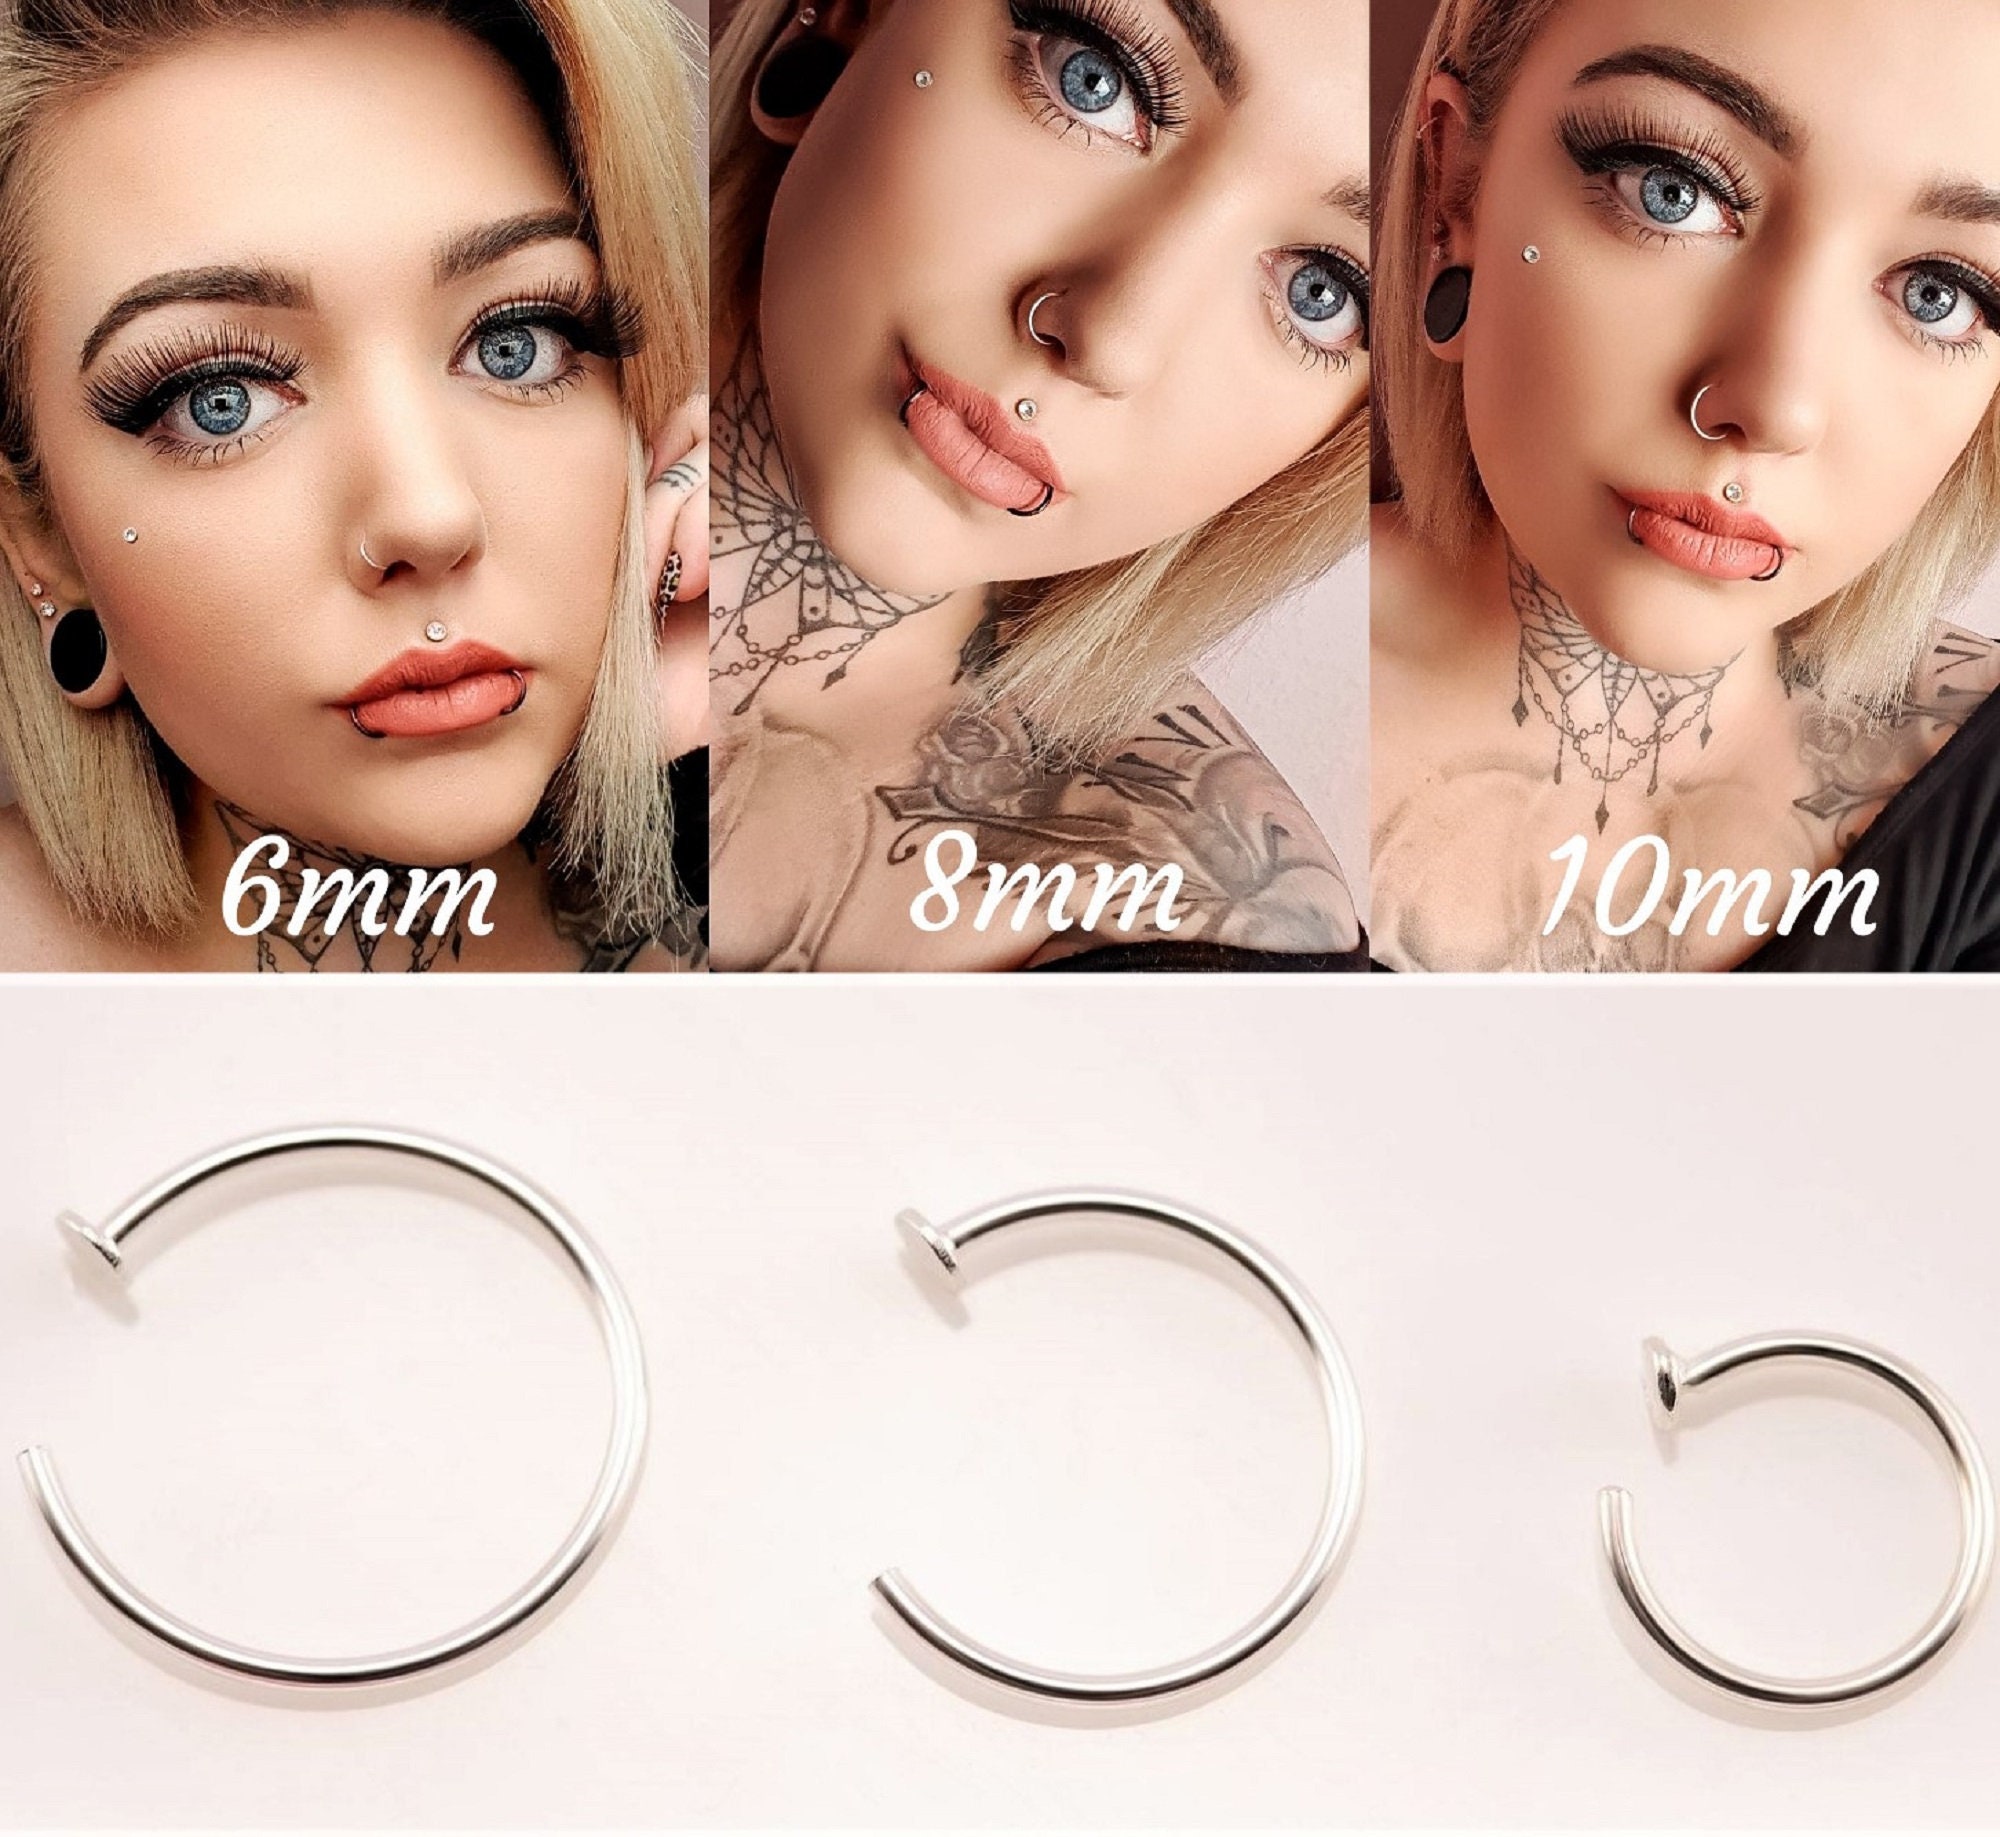 Buy Gold Filled 14k Nose Ring Thin Nose Hoop Size 6mm, 8mm, 10mm, Gold  Filled Wire Gauge 24 Dainty Delicate Body Piercing Jewelry Online in India  - Etsy